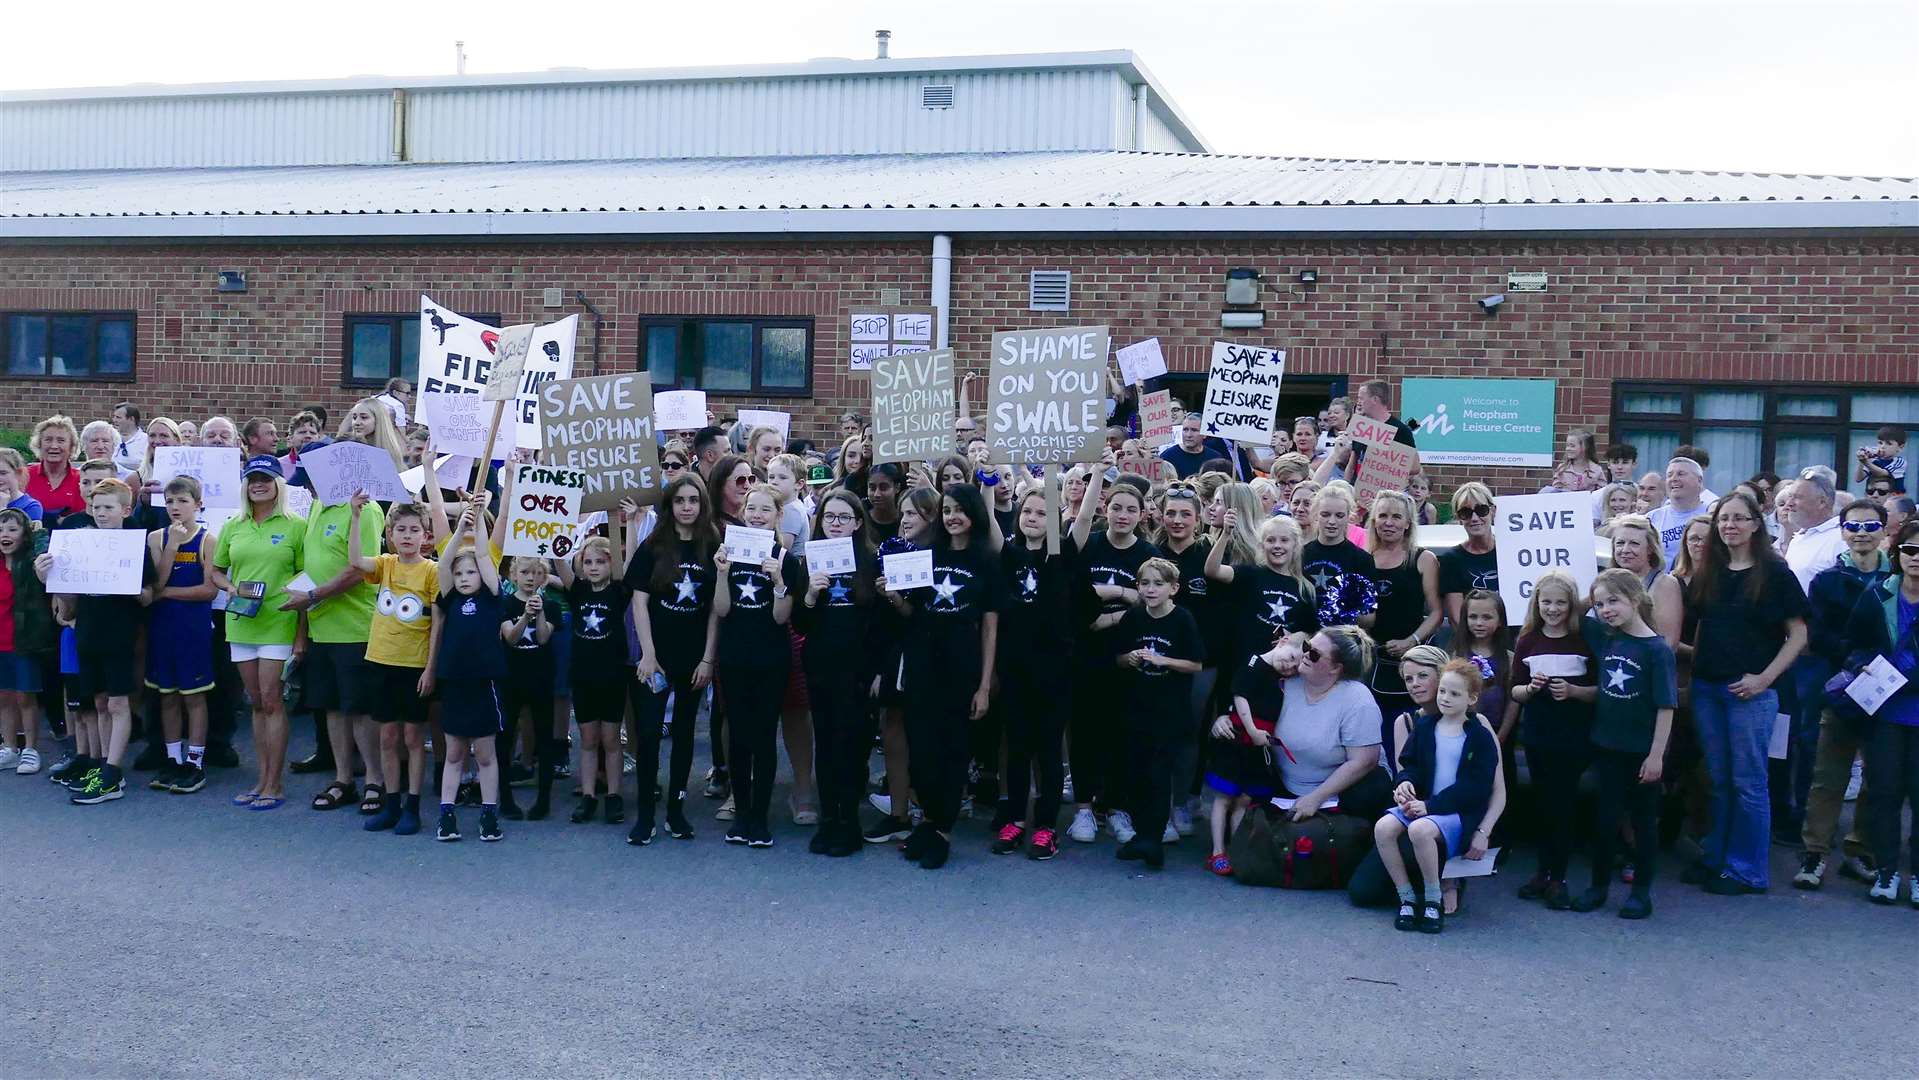 Protests were held over its planned closure. Photo: Anna Roberts